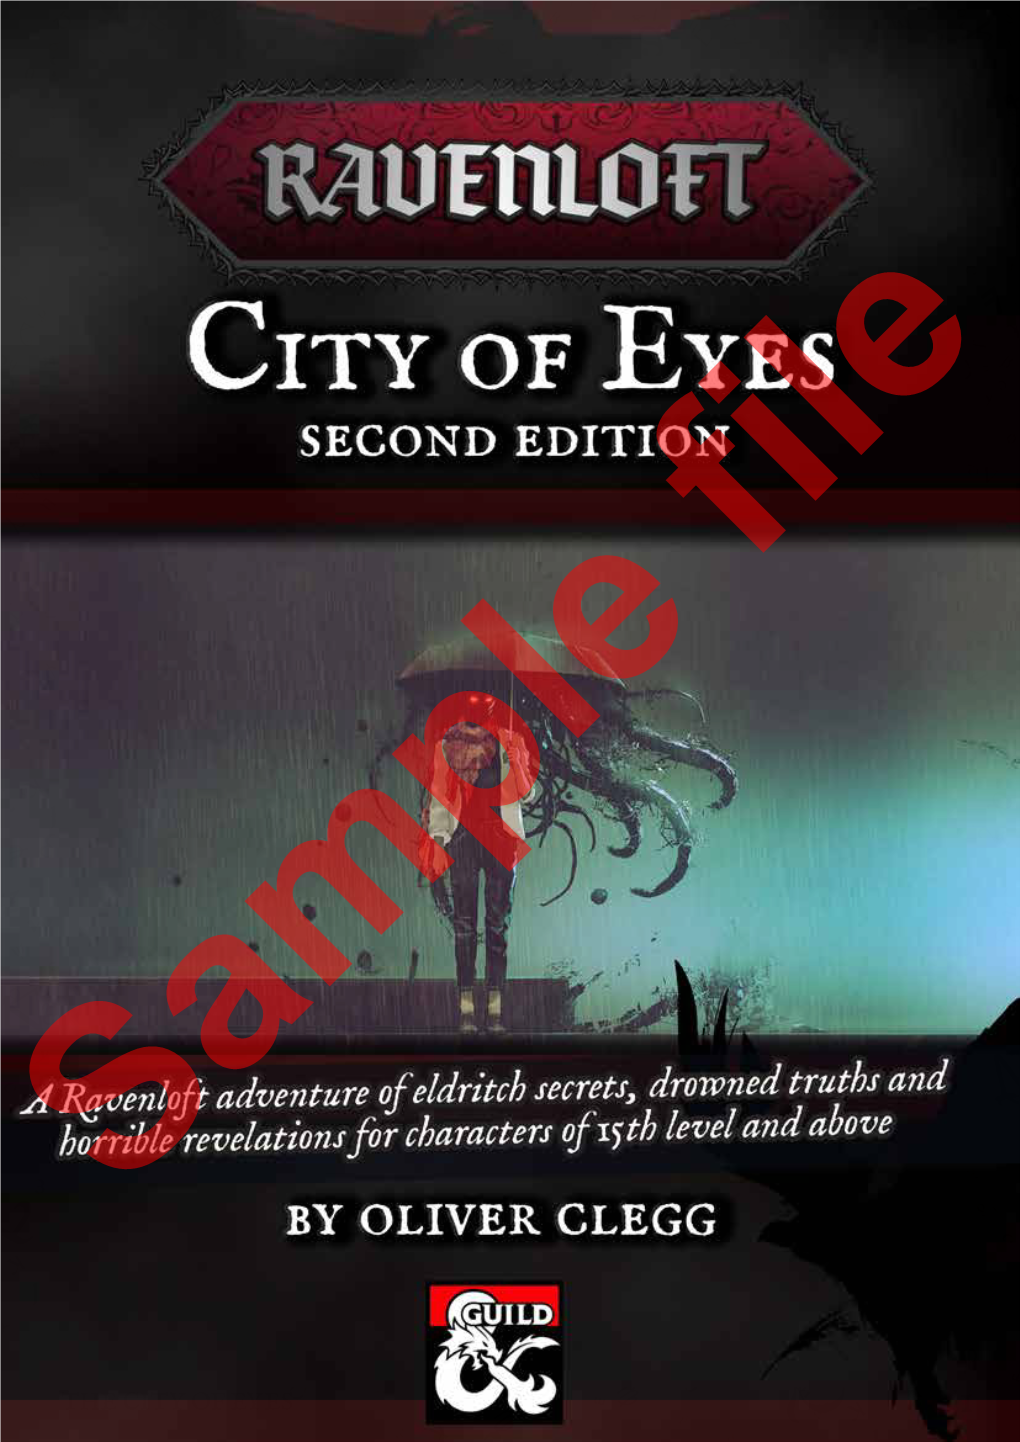 THE CITY of EYES 1 the CITY of EYES Second Edition the Sky Is Full of Falling Spiders